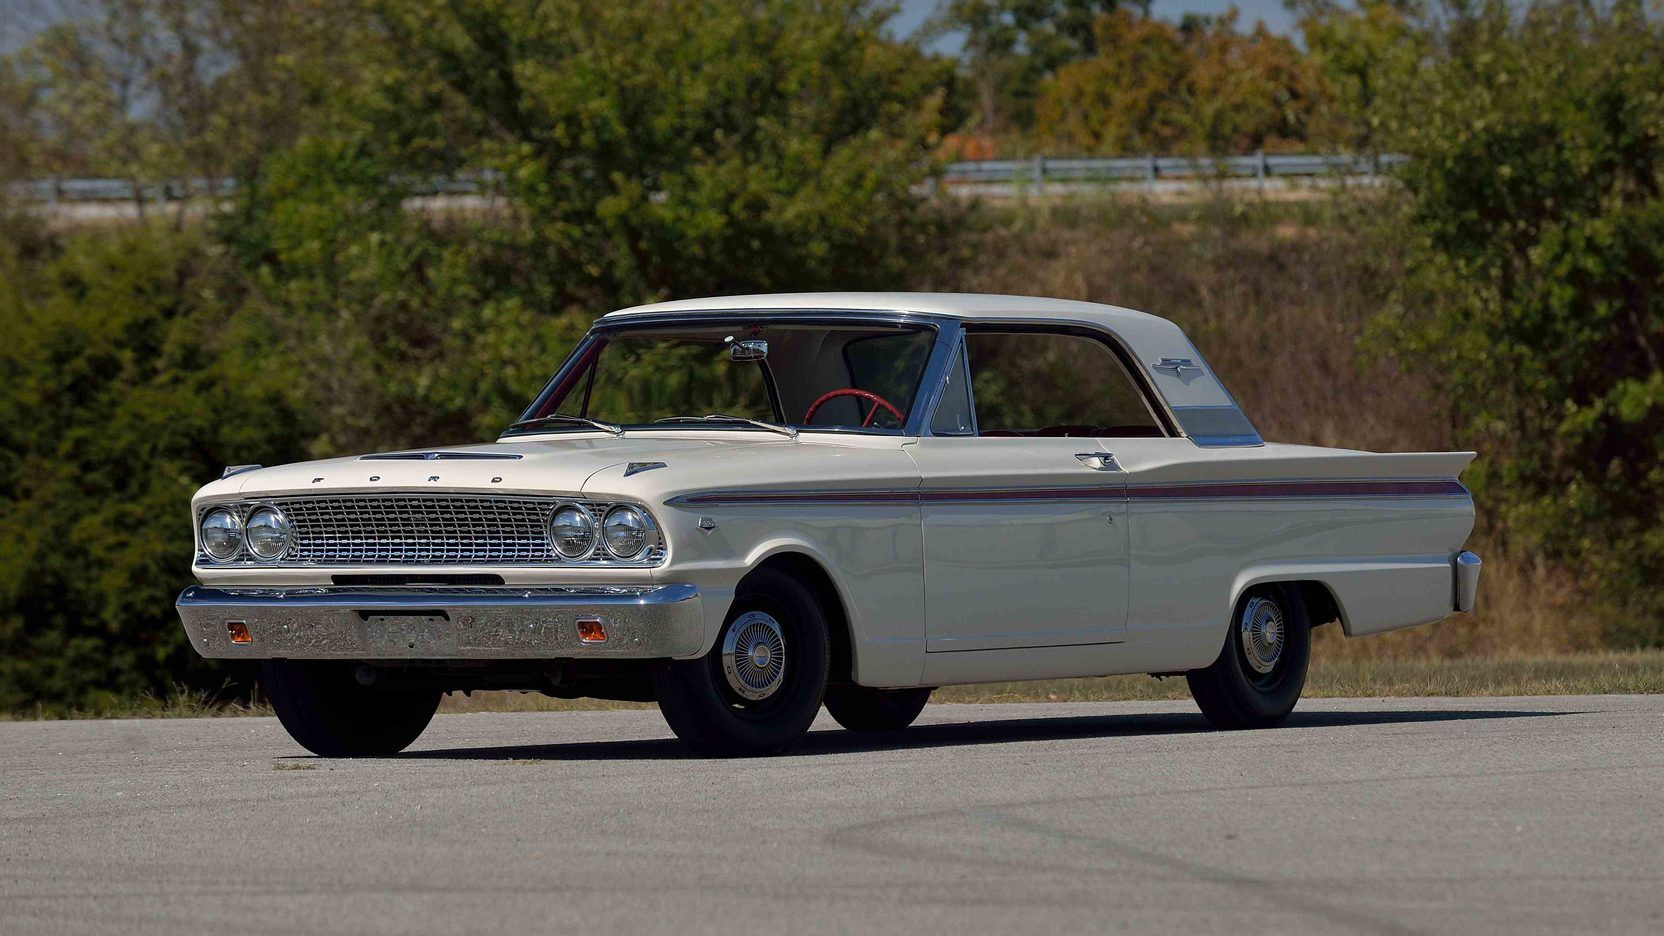 1963 Ford Fairlane: The forgotten muscle car.